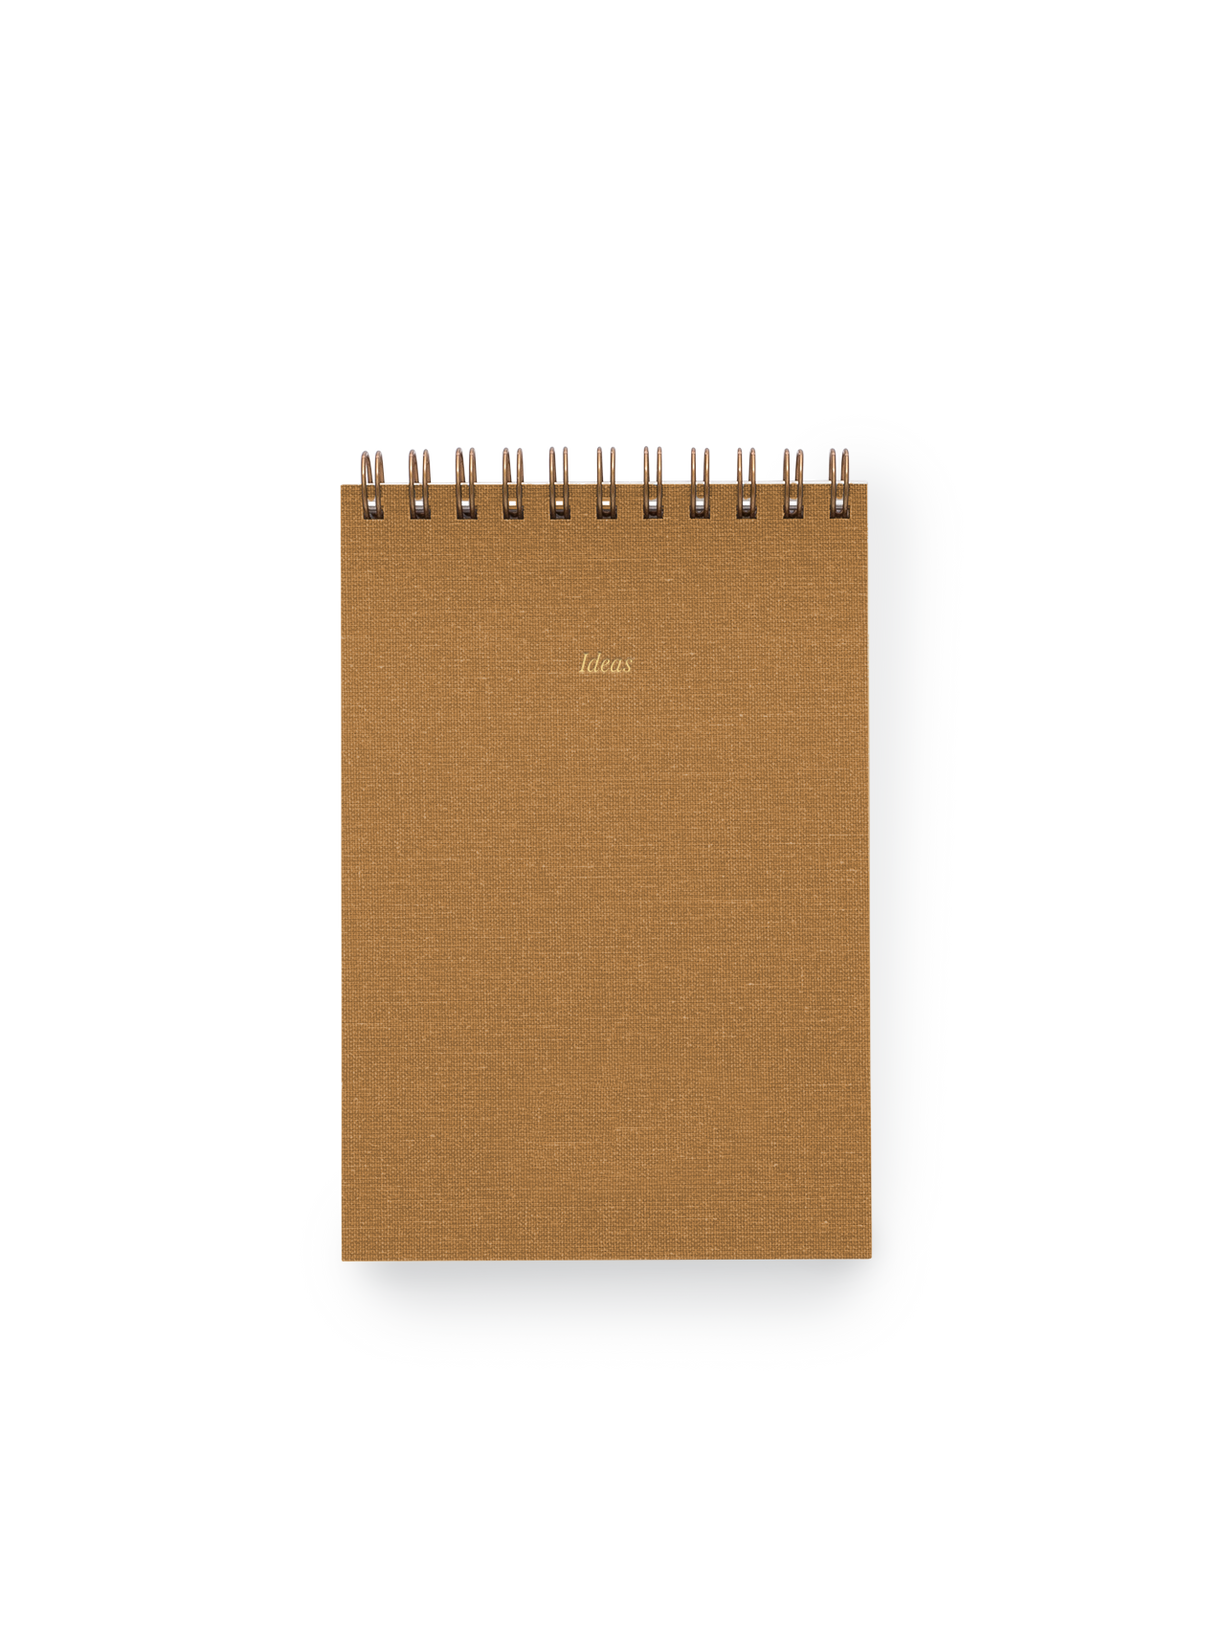 Ideas notepad front view with bookcloth cover and brass wire-o binding